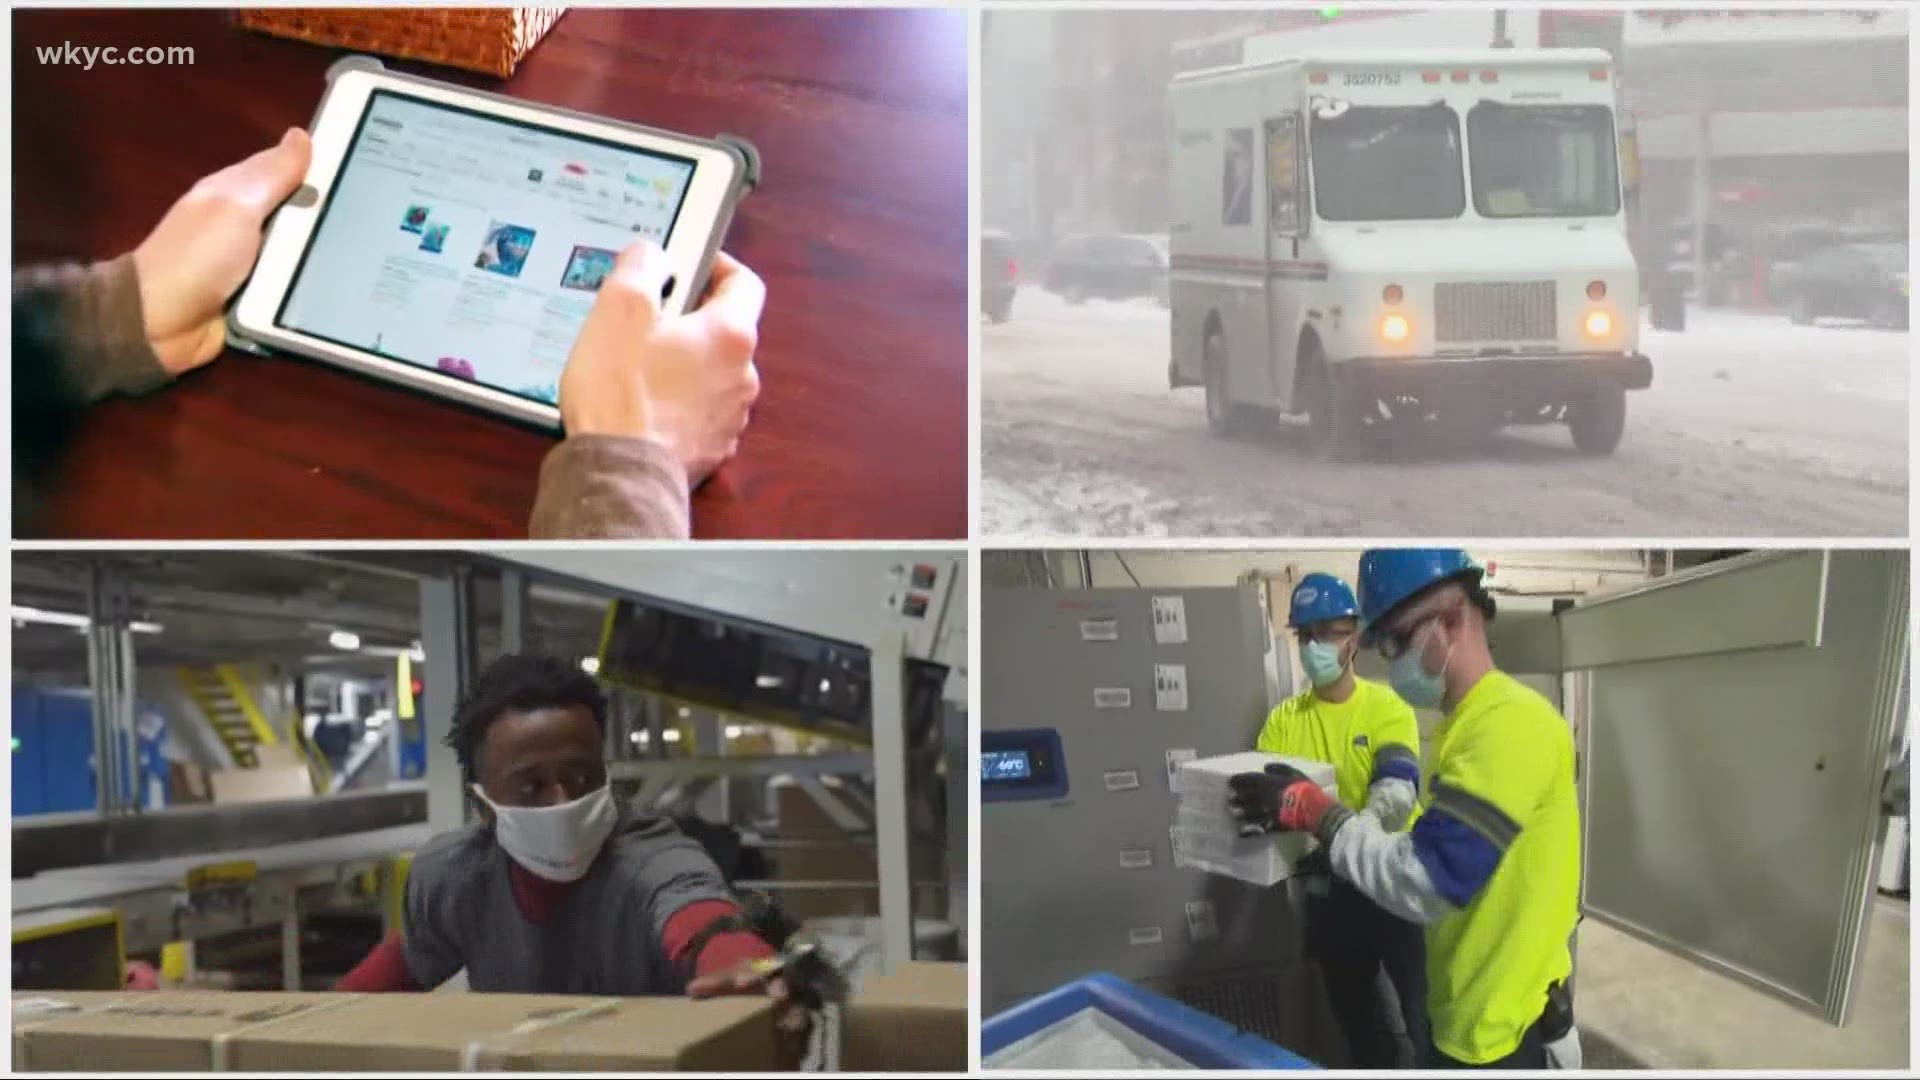 Winter storms and COVID-19 have wreaked havoc on package deliveries this holiday season. 3News' Andrew Horansky provides an update on the shipping situation.